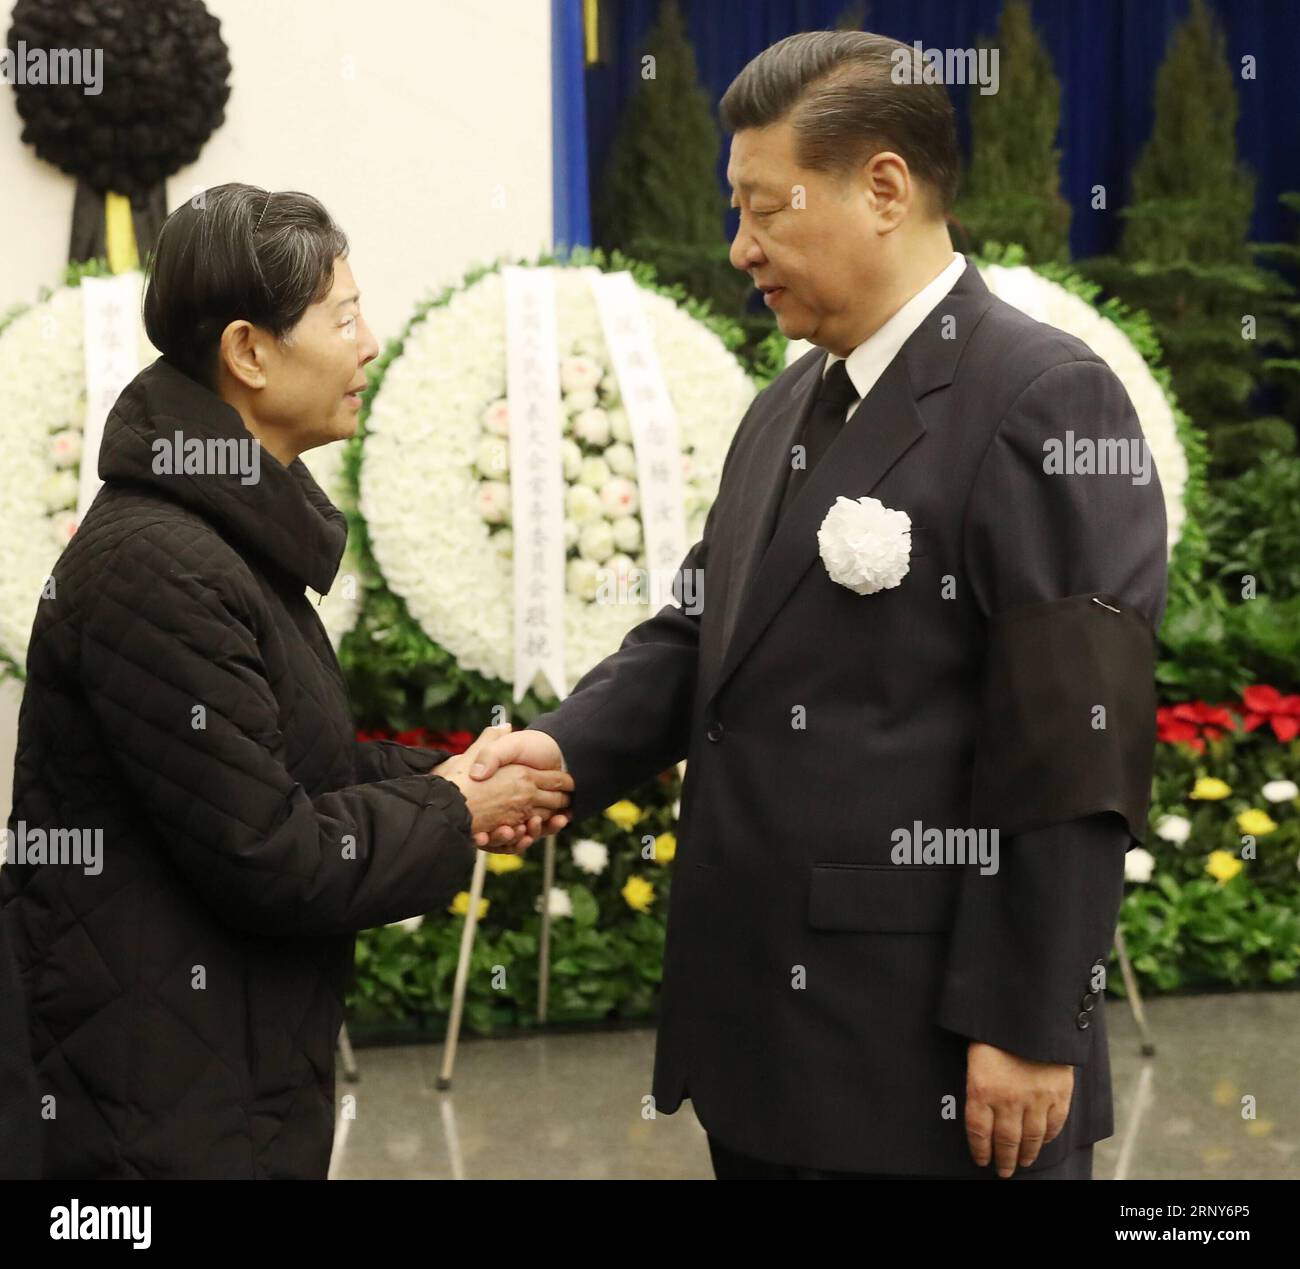 (180302) -- BEIJING, March 2, 2018 -- Chinese President Xi Jinping (R) shakes hands with a family member of Yang Rudai, former member of the Political Bureau of the Central Committee of the Communist Party of China (CPC), at the funeral of Yang at the Babaoshan Revolutionary Cemetery in Beijing, capital of China, March 2, 2018. Yang passed away due to illness at the age of 92 in Beijing on Feb. 24. Yang was also former vice chairman of the National Committee of the Chinese People s Political Consultative Conference and former secretary of the CPC Sichuan Provincial Committee. ) (ry) CHINA-BEIJ Stock Photo